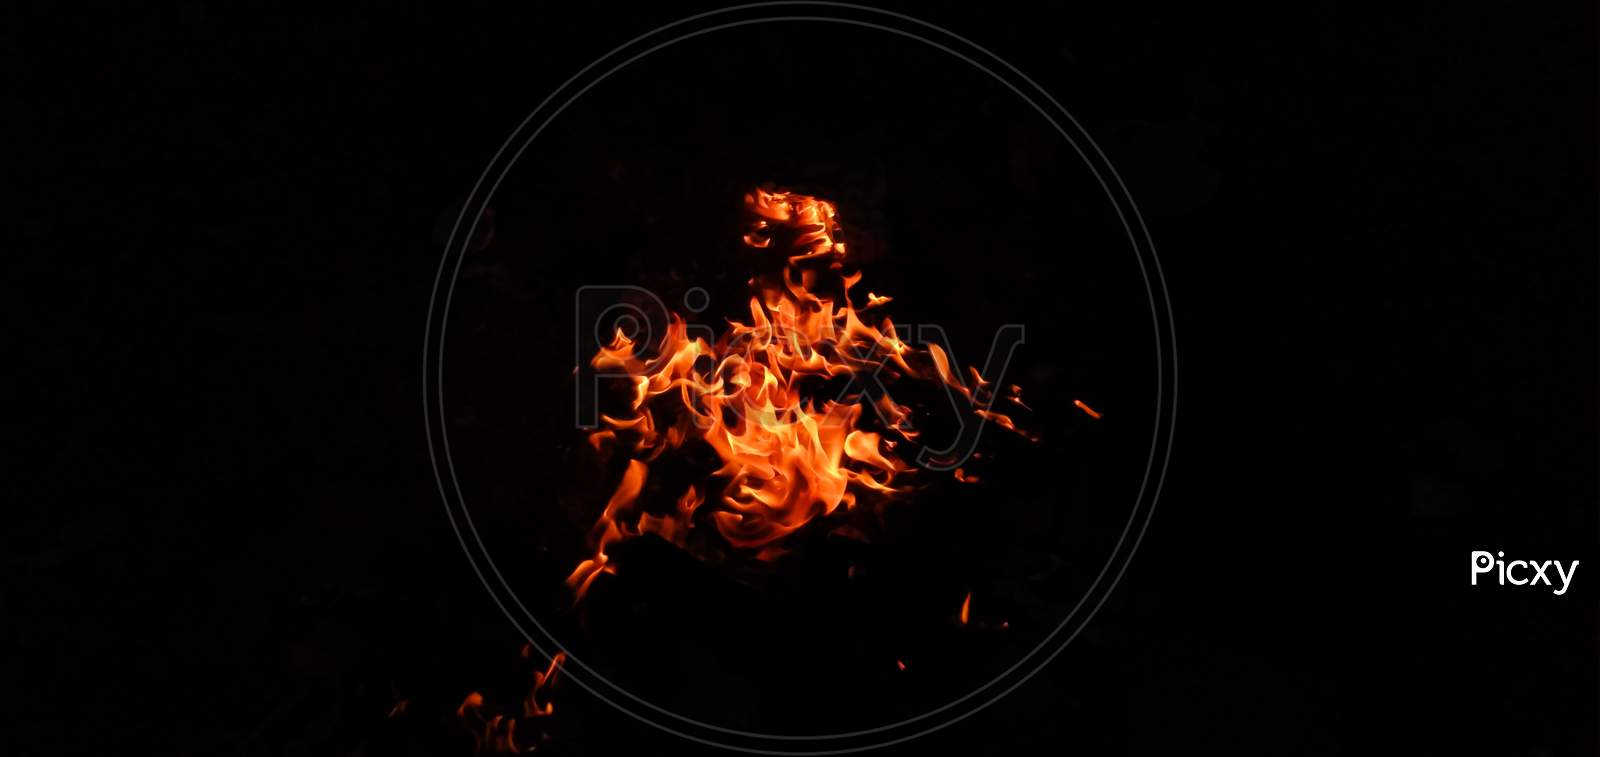 Texture burning fire on black background.